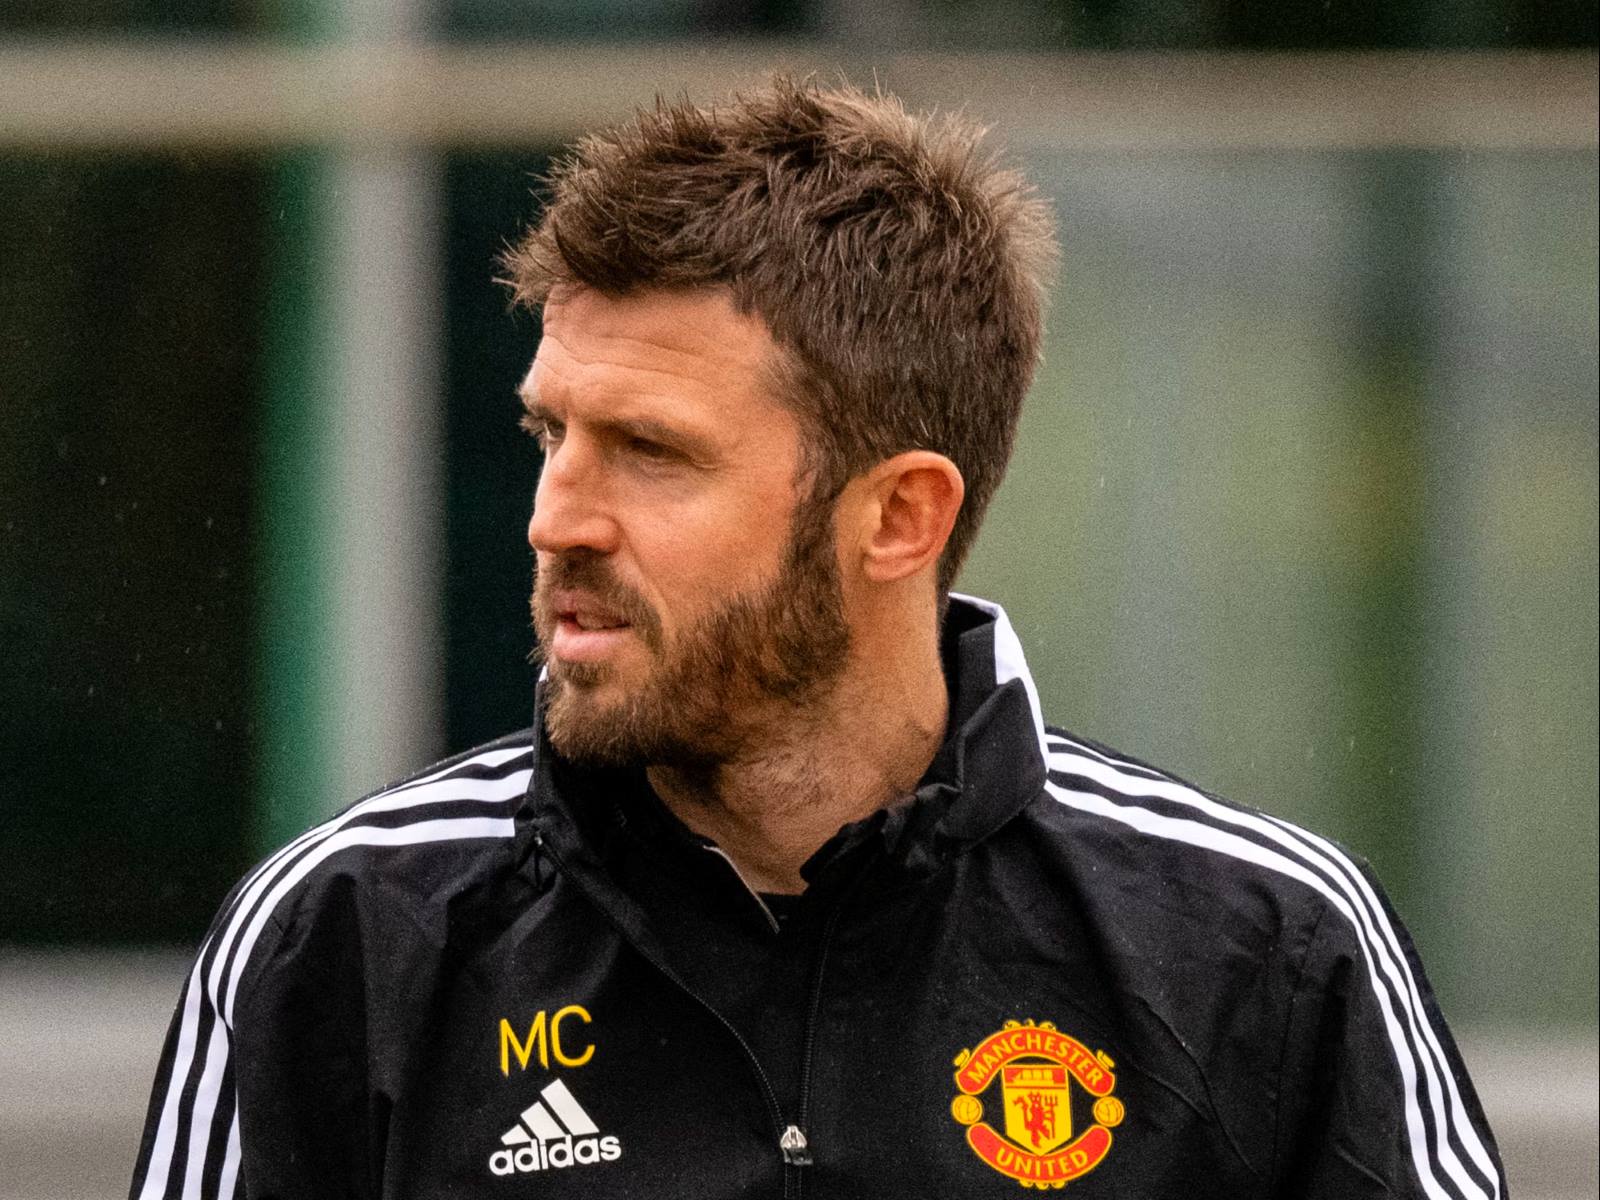 10-astounding-facts-about-michael-carrick